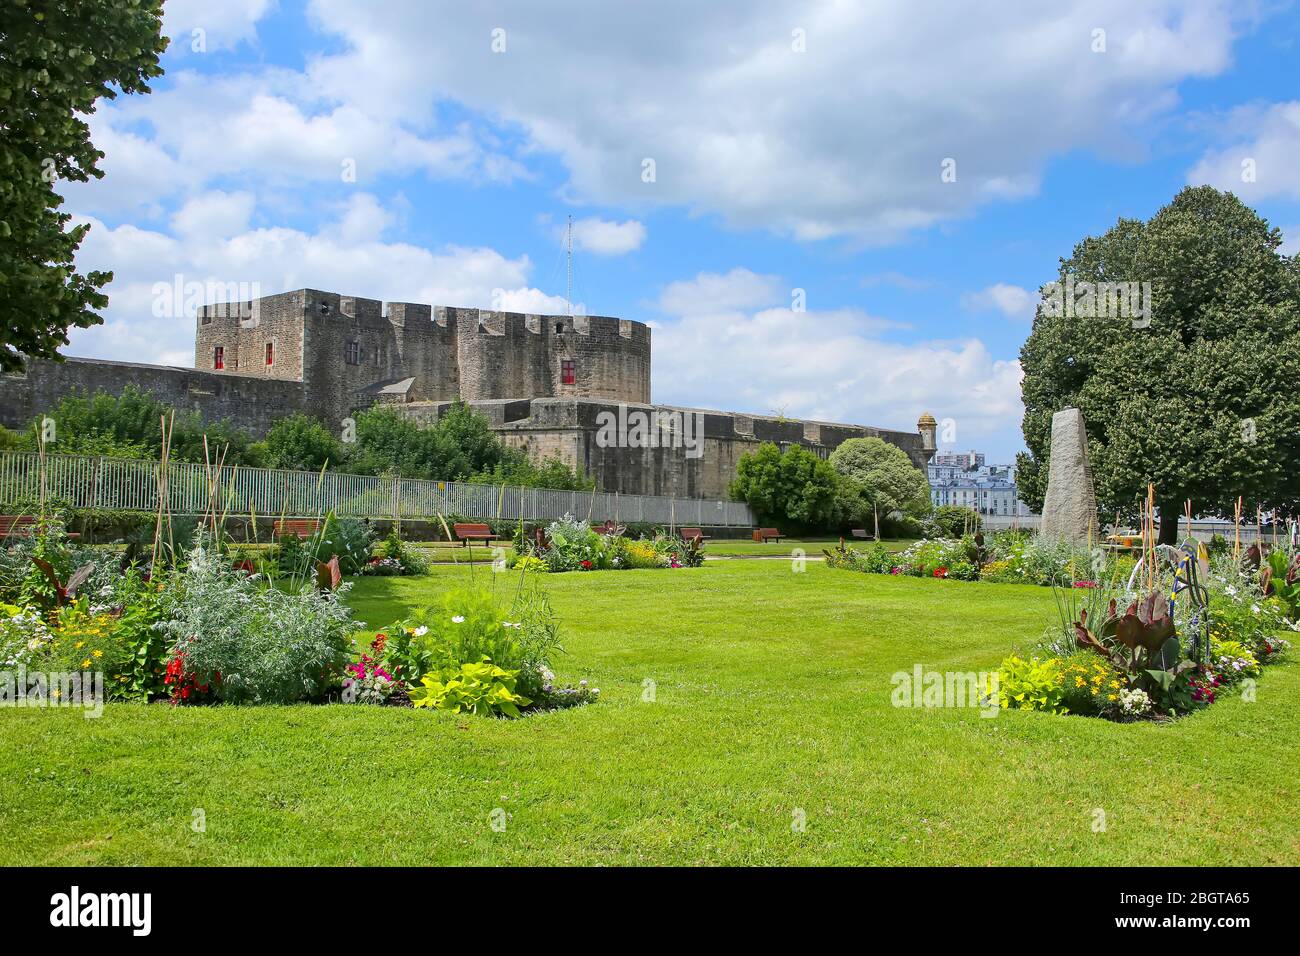 Beautiful public park & gardens with, with the Château de Brest in the background. This is a fort in Brest, Brittany, France. Stock Photo